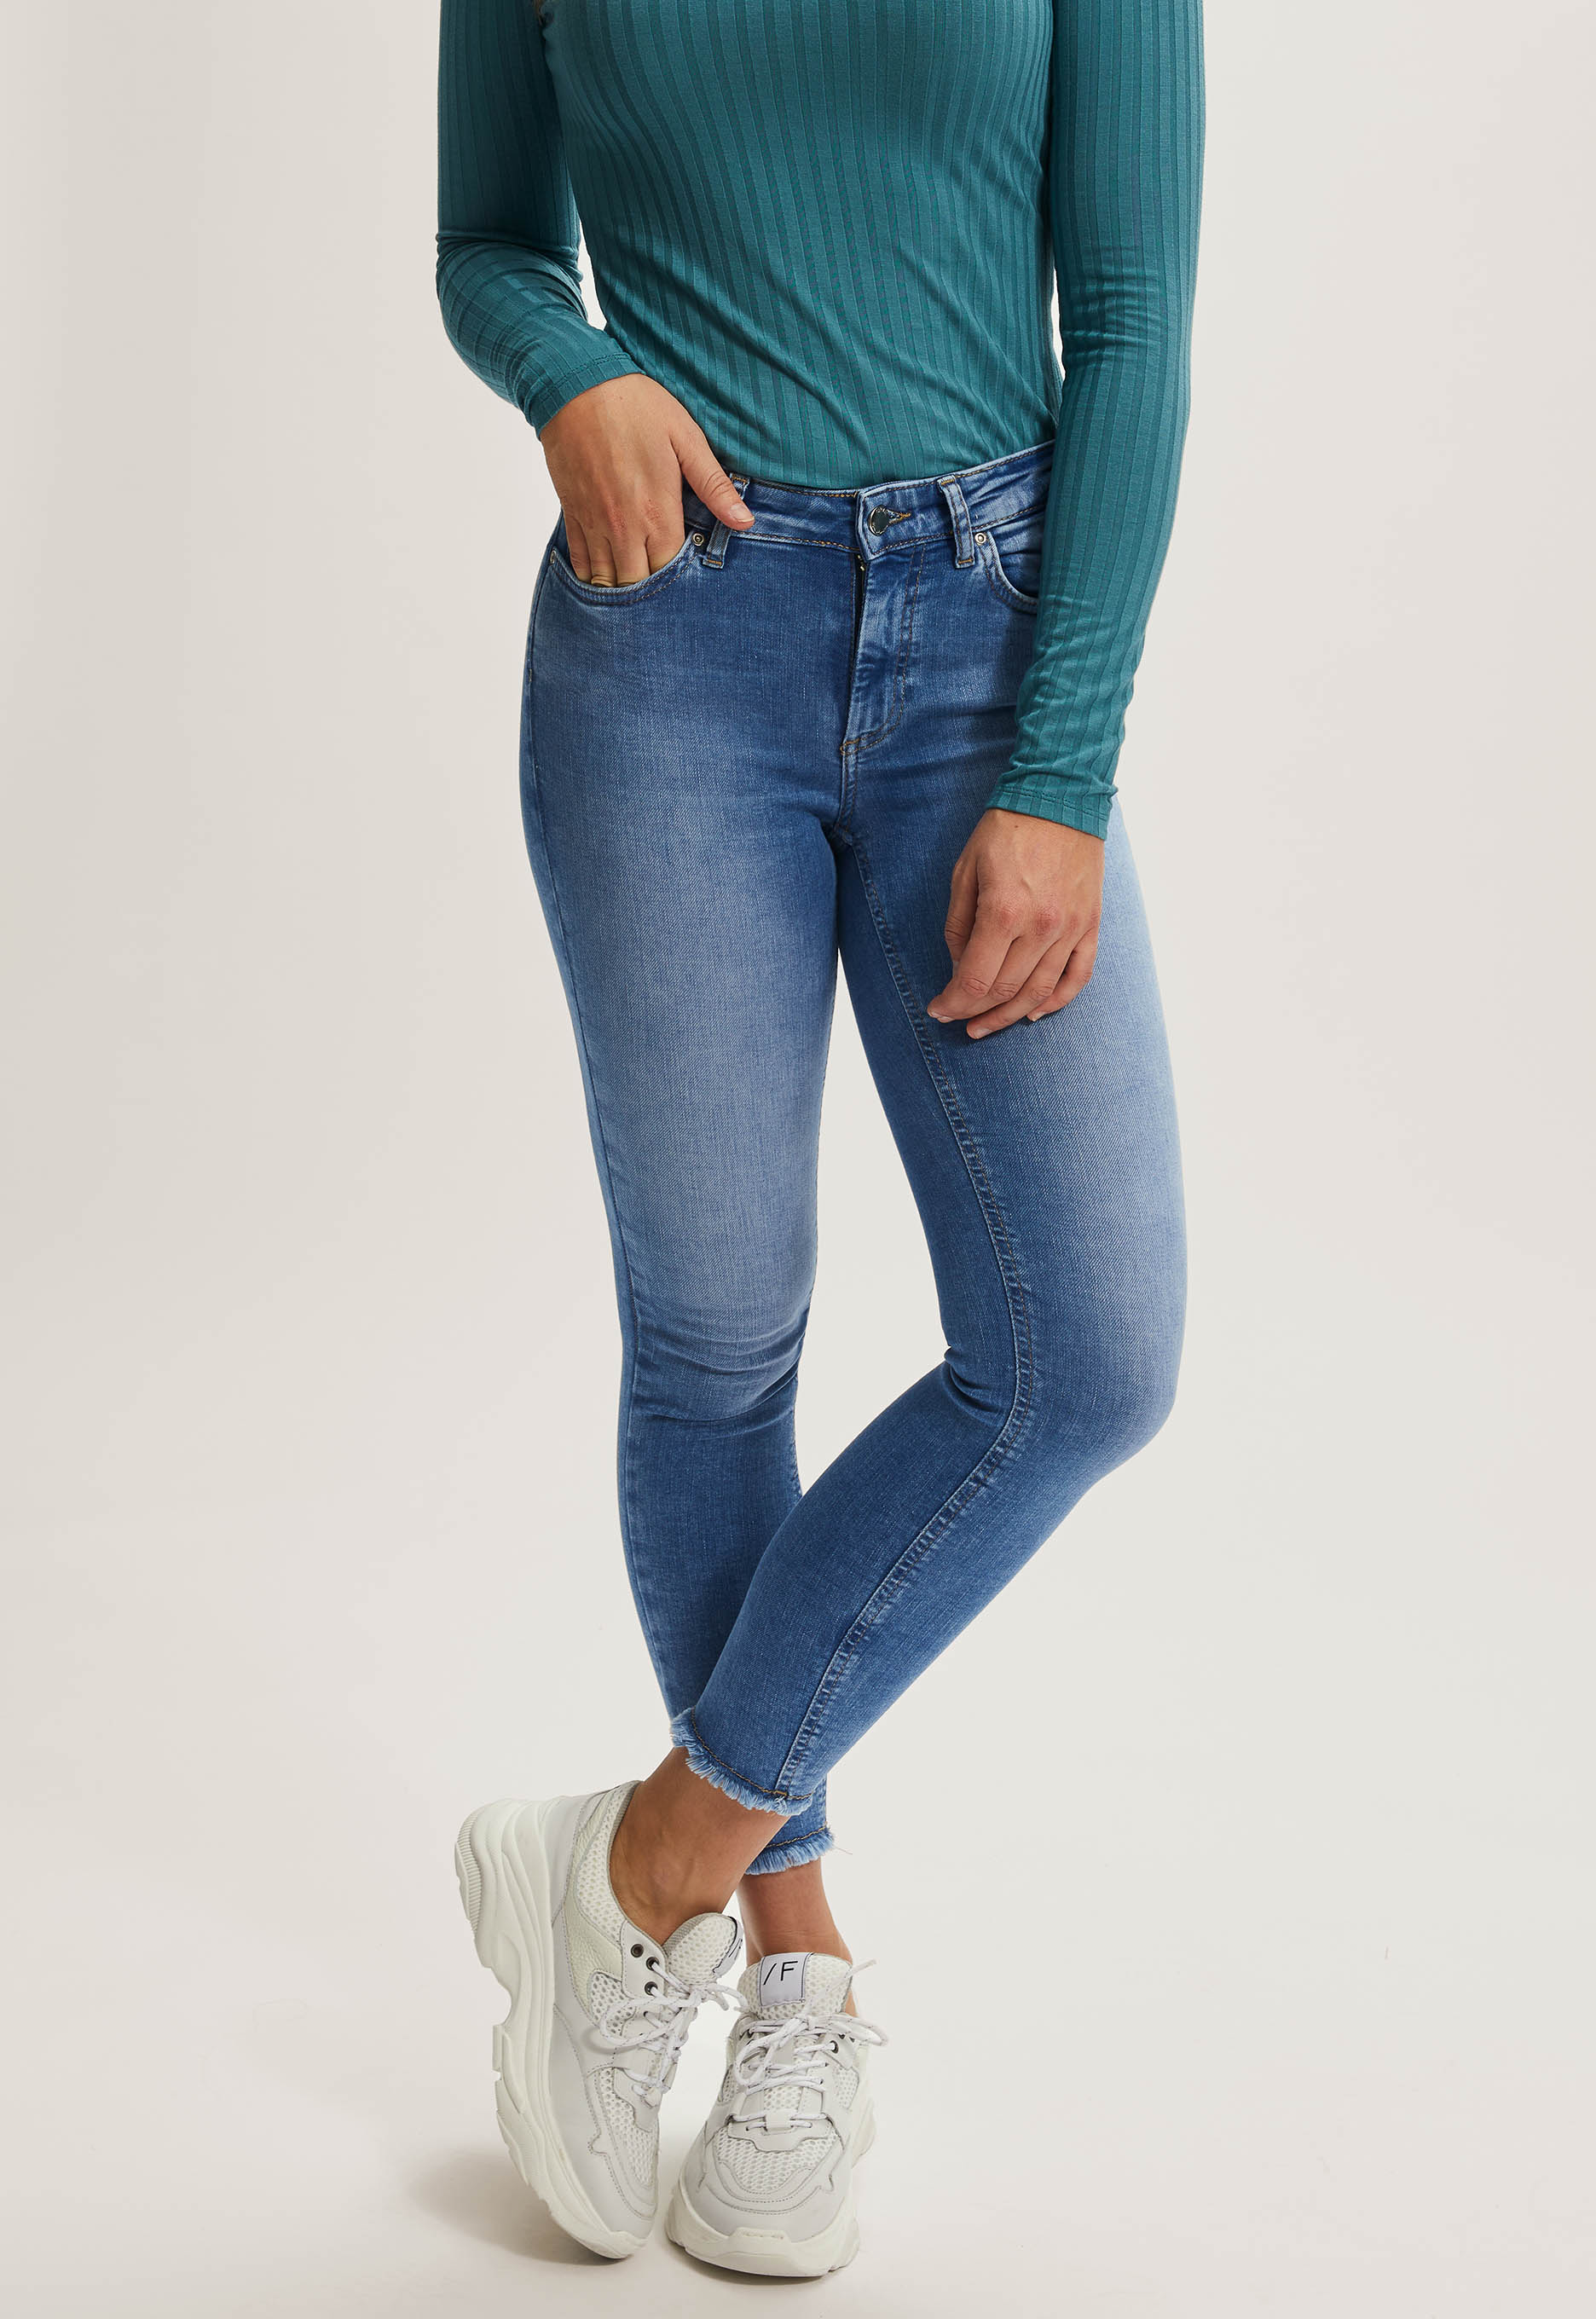 Only Blush Midwaist Skinny Jeans